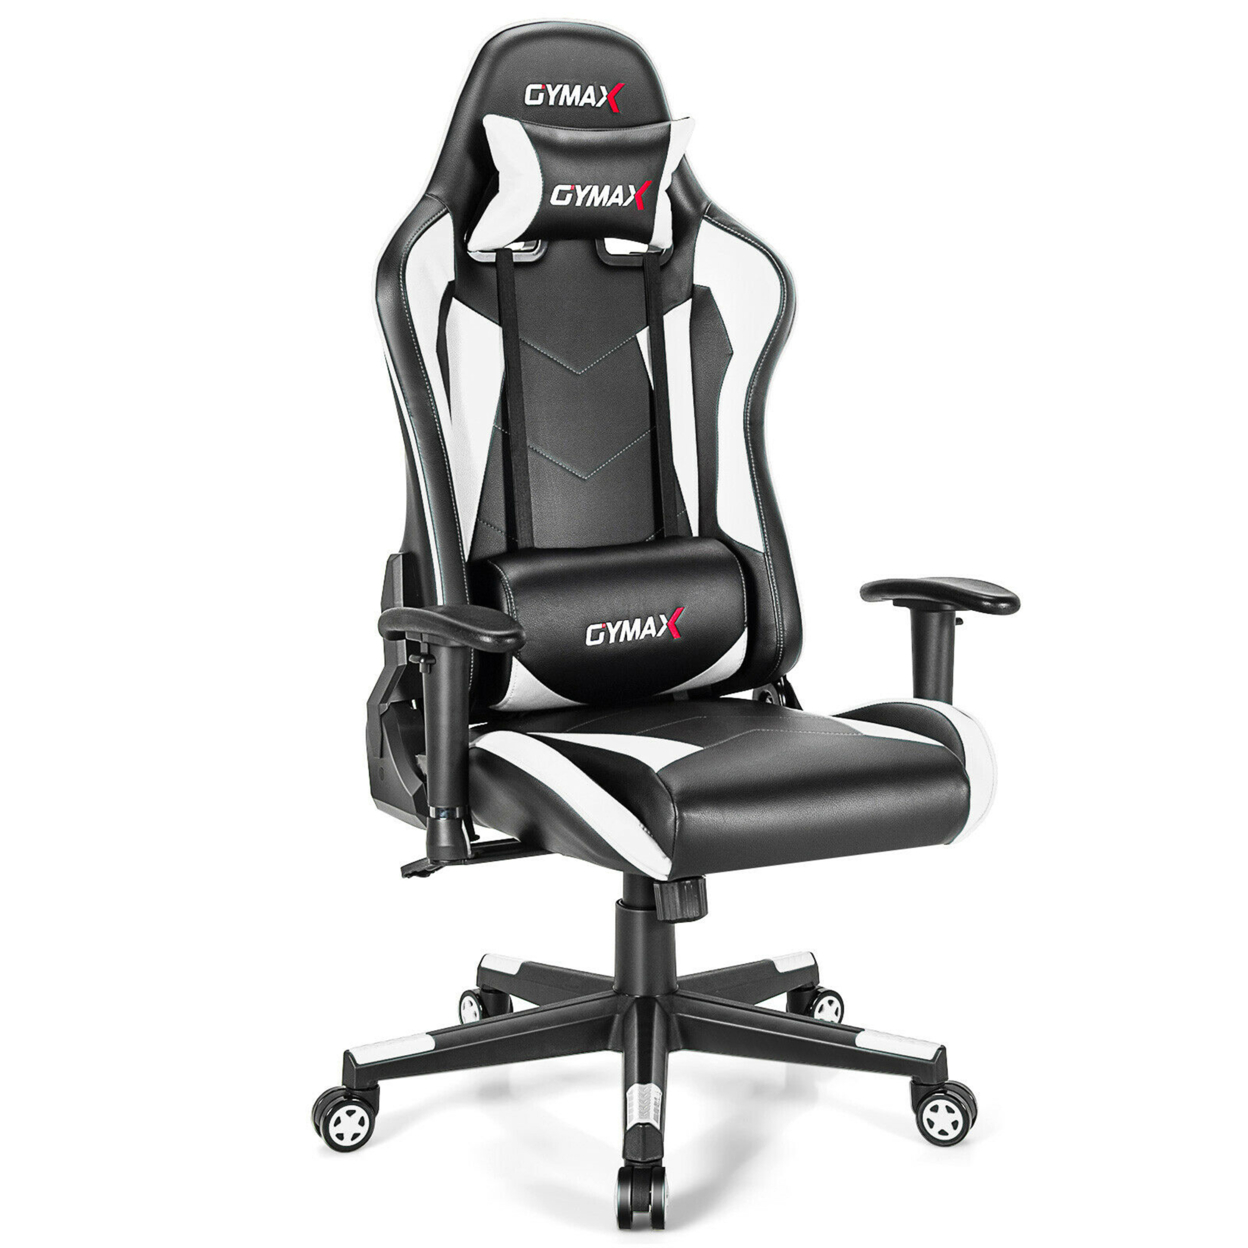 Gaming Chair Adjustable Swivel Racing Style Computer Office Chair - Black + White